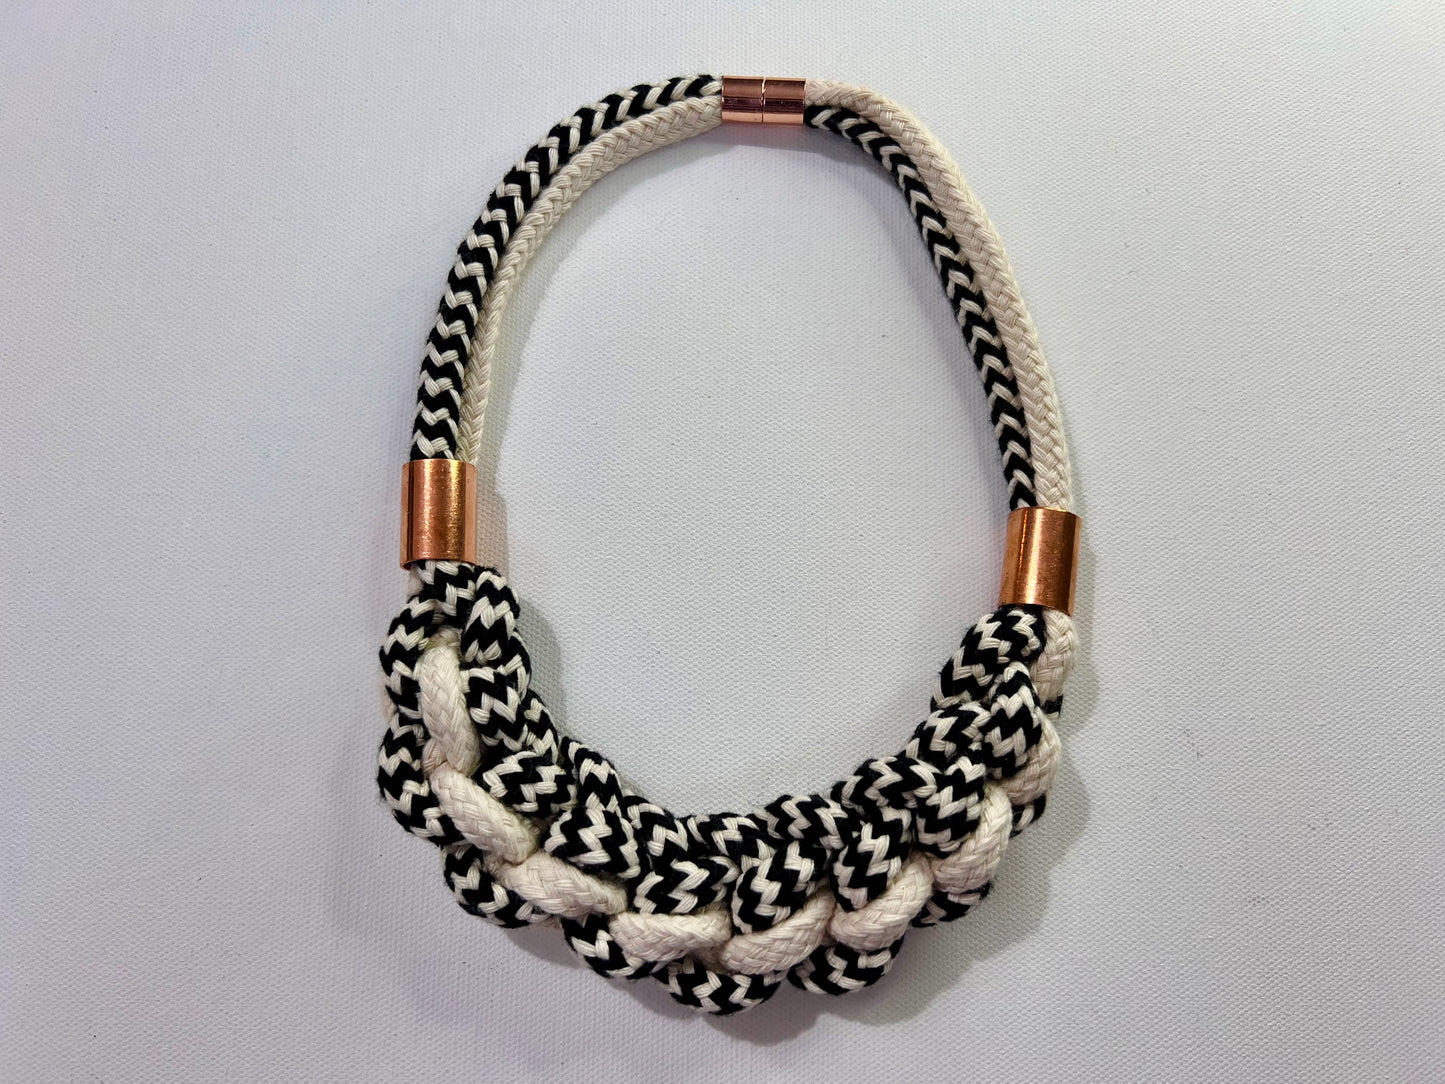 Chunky monochrome rope necklace with copper accents